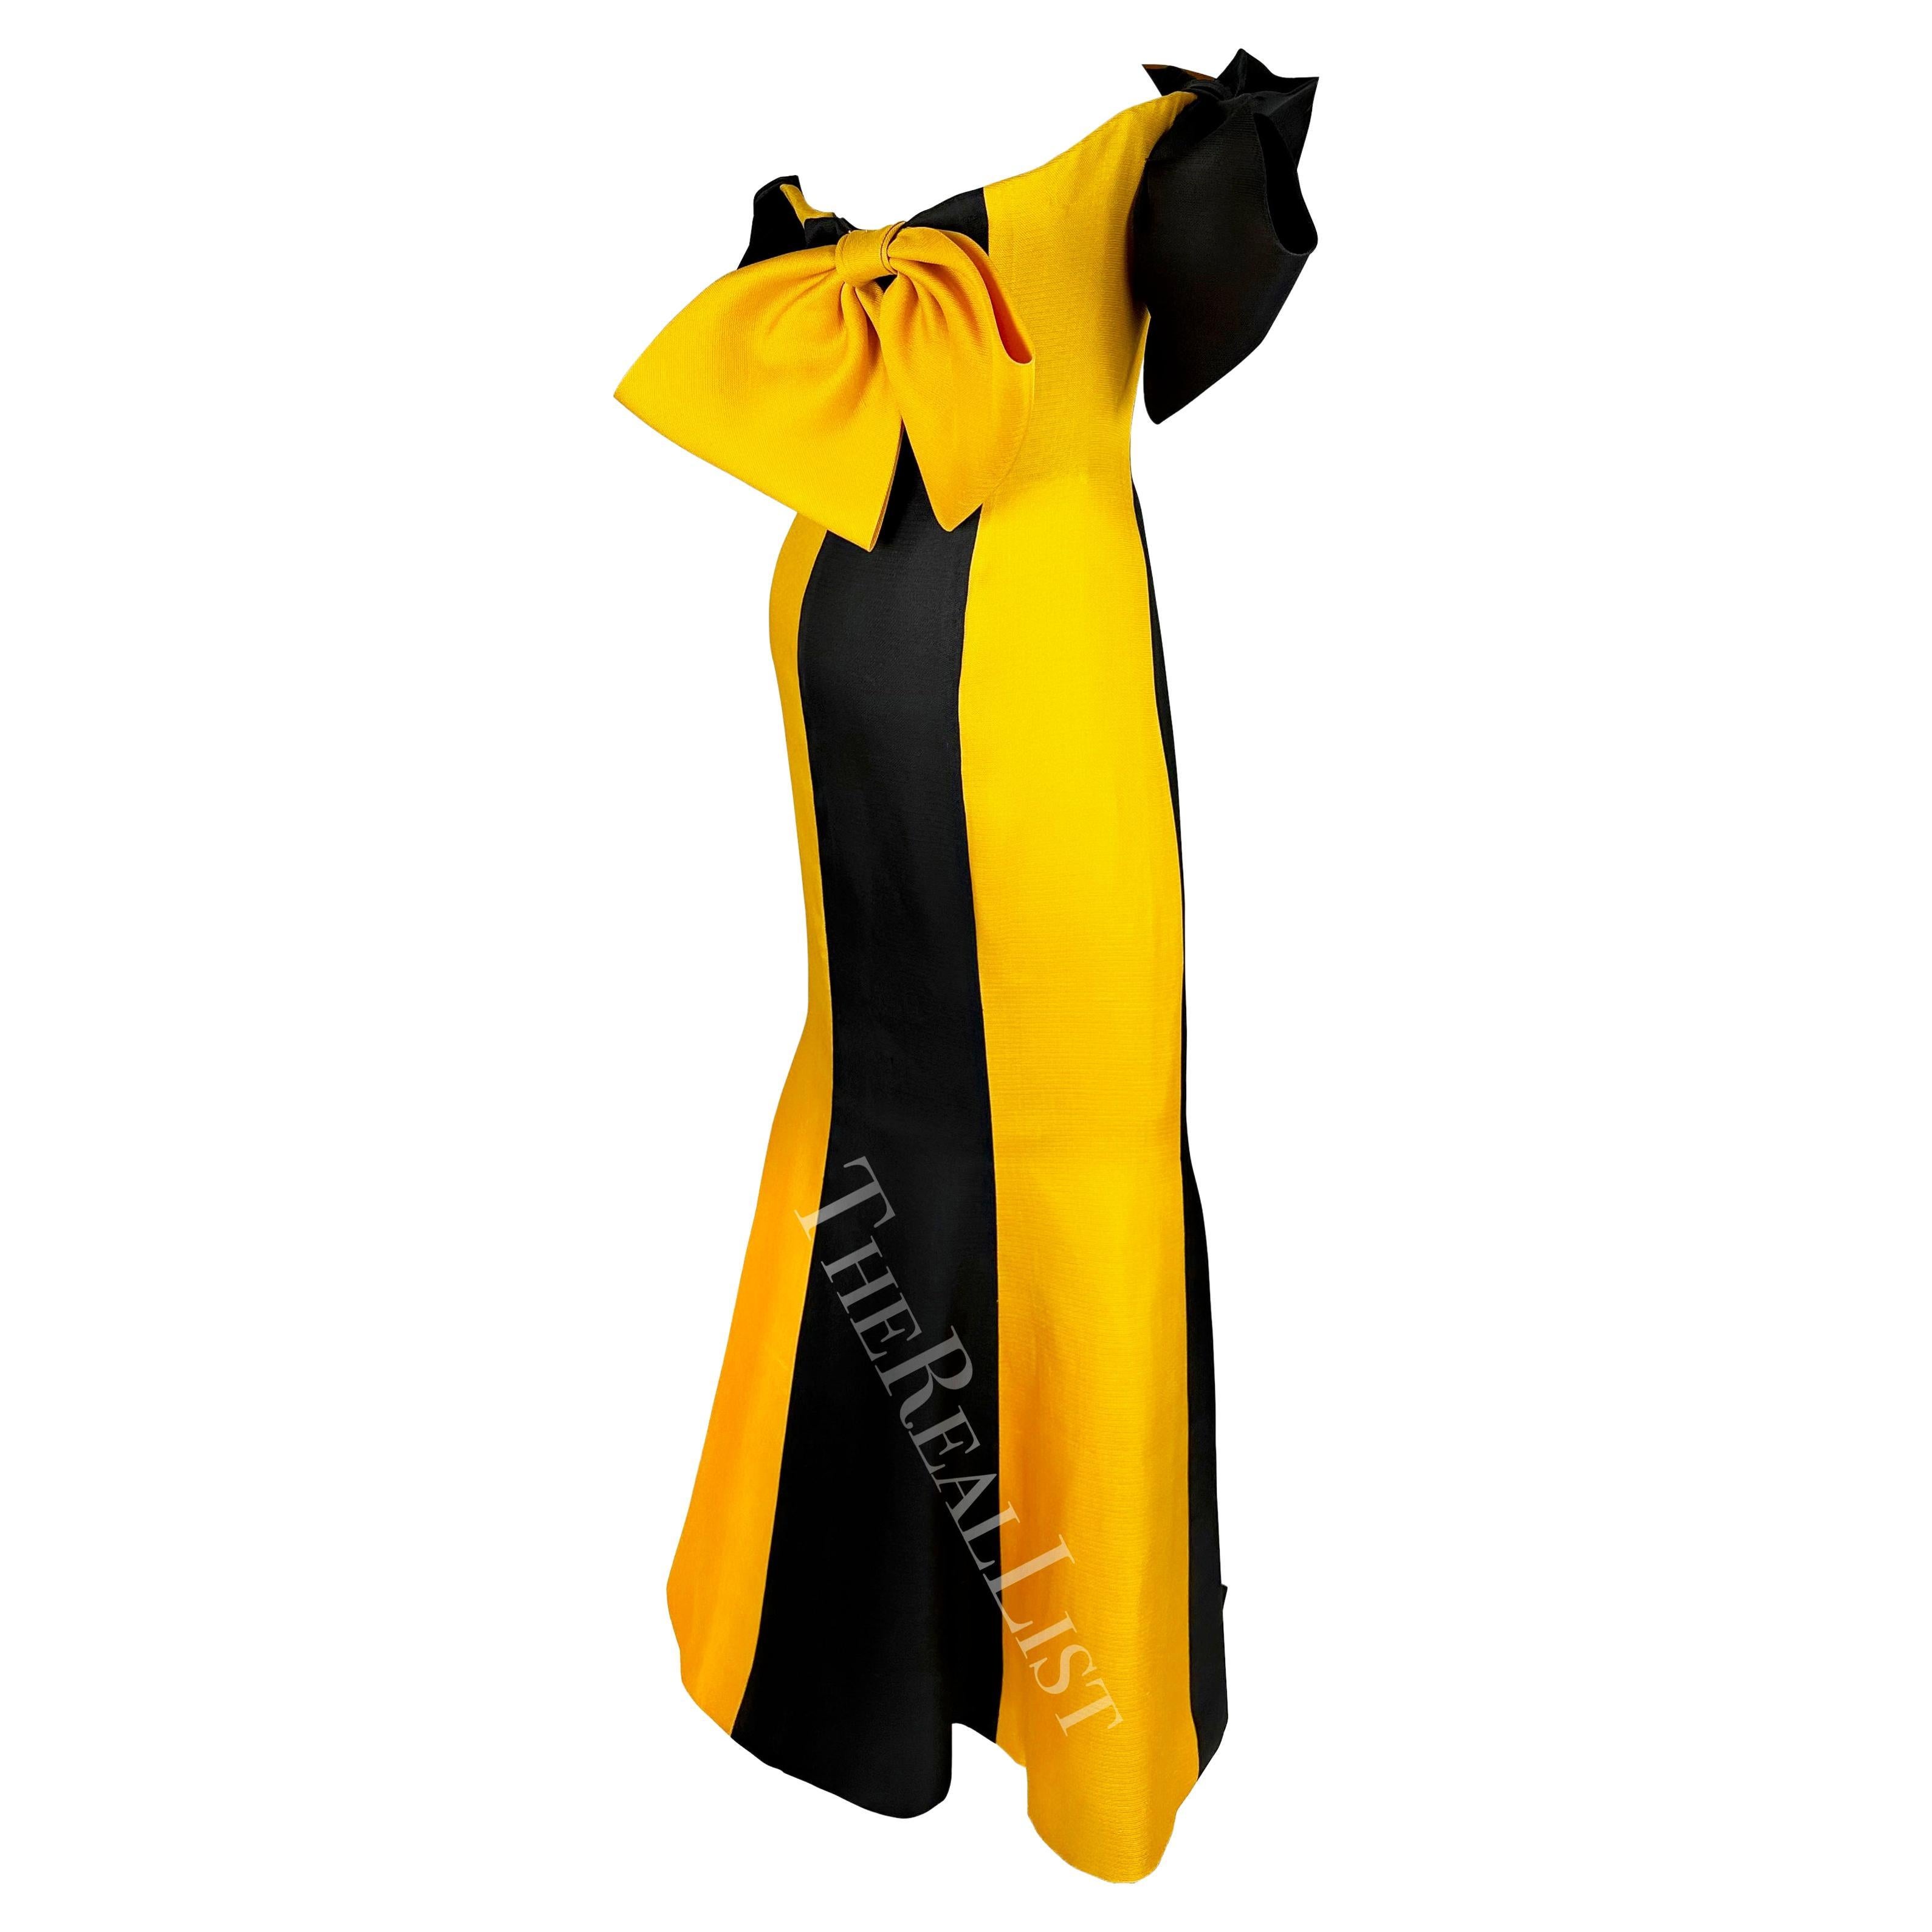 S/S 1987 Givenchy Haute Couture Runway Yellow Black Bow Trumpet Flare Gown For Sale 6